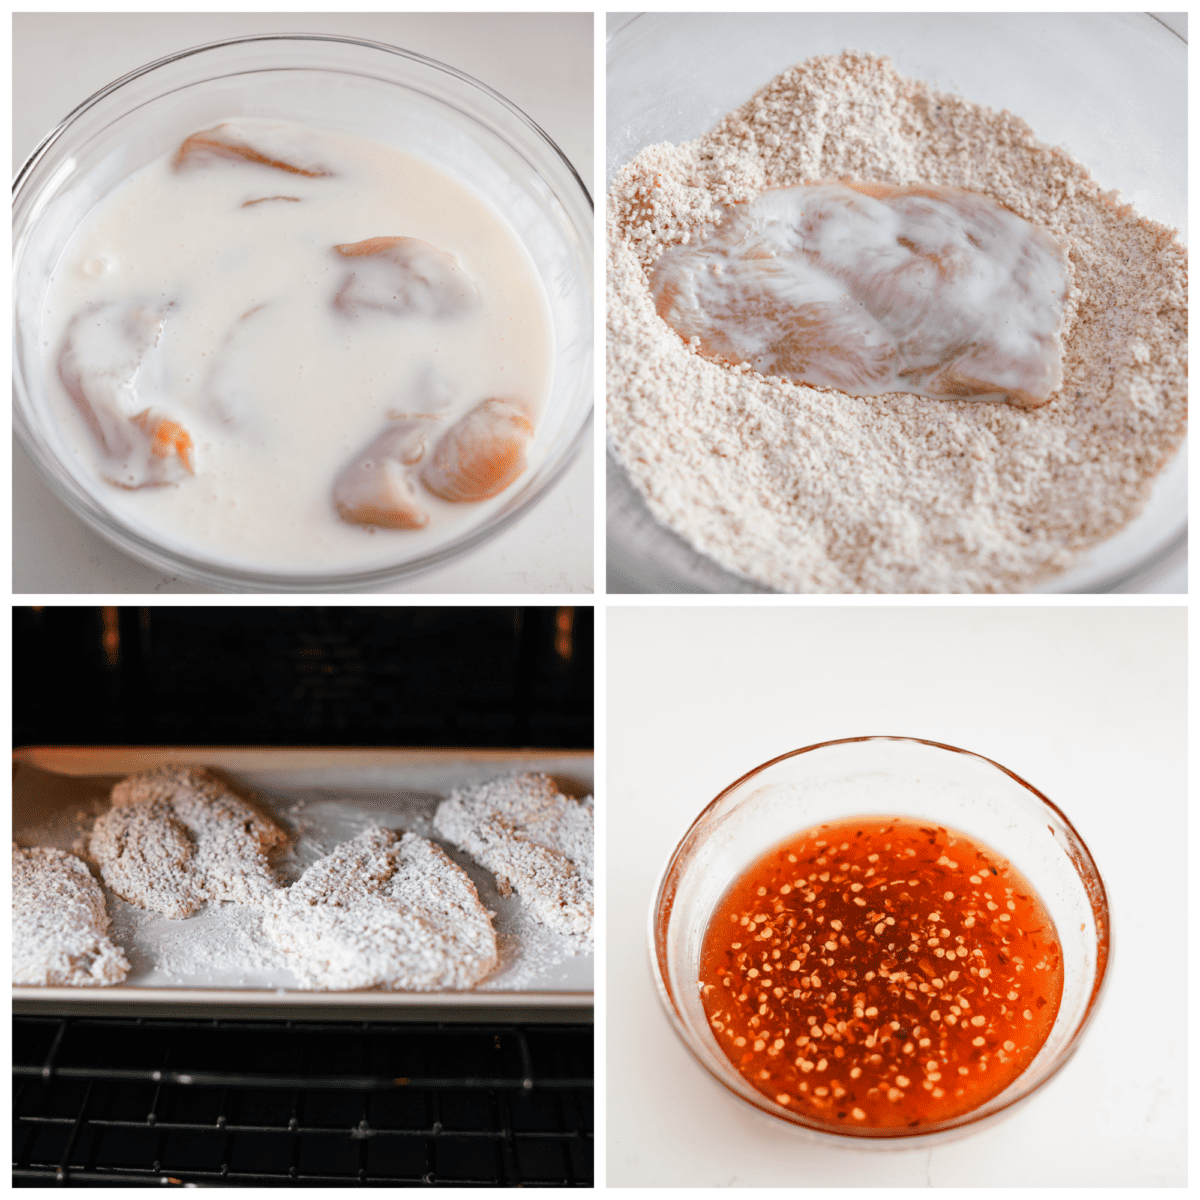 4-photo collage of the chicken being battered and the hot honey sauce being prepared.